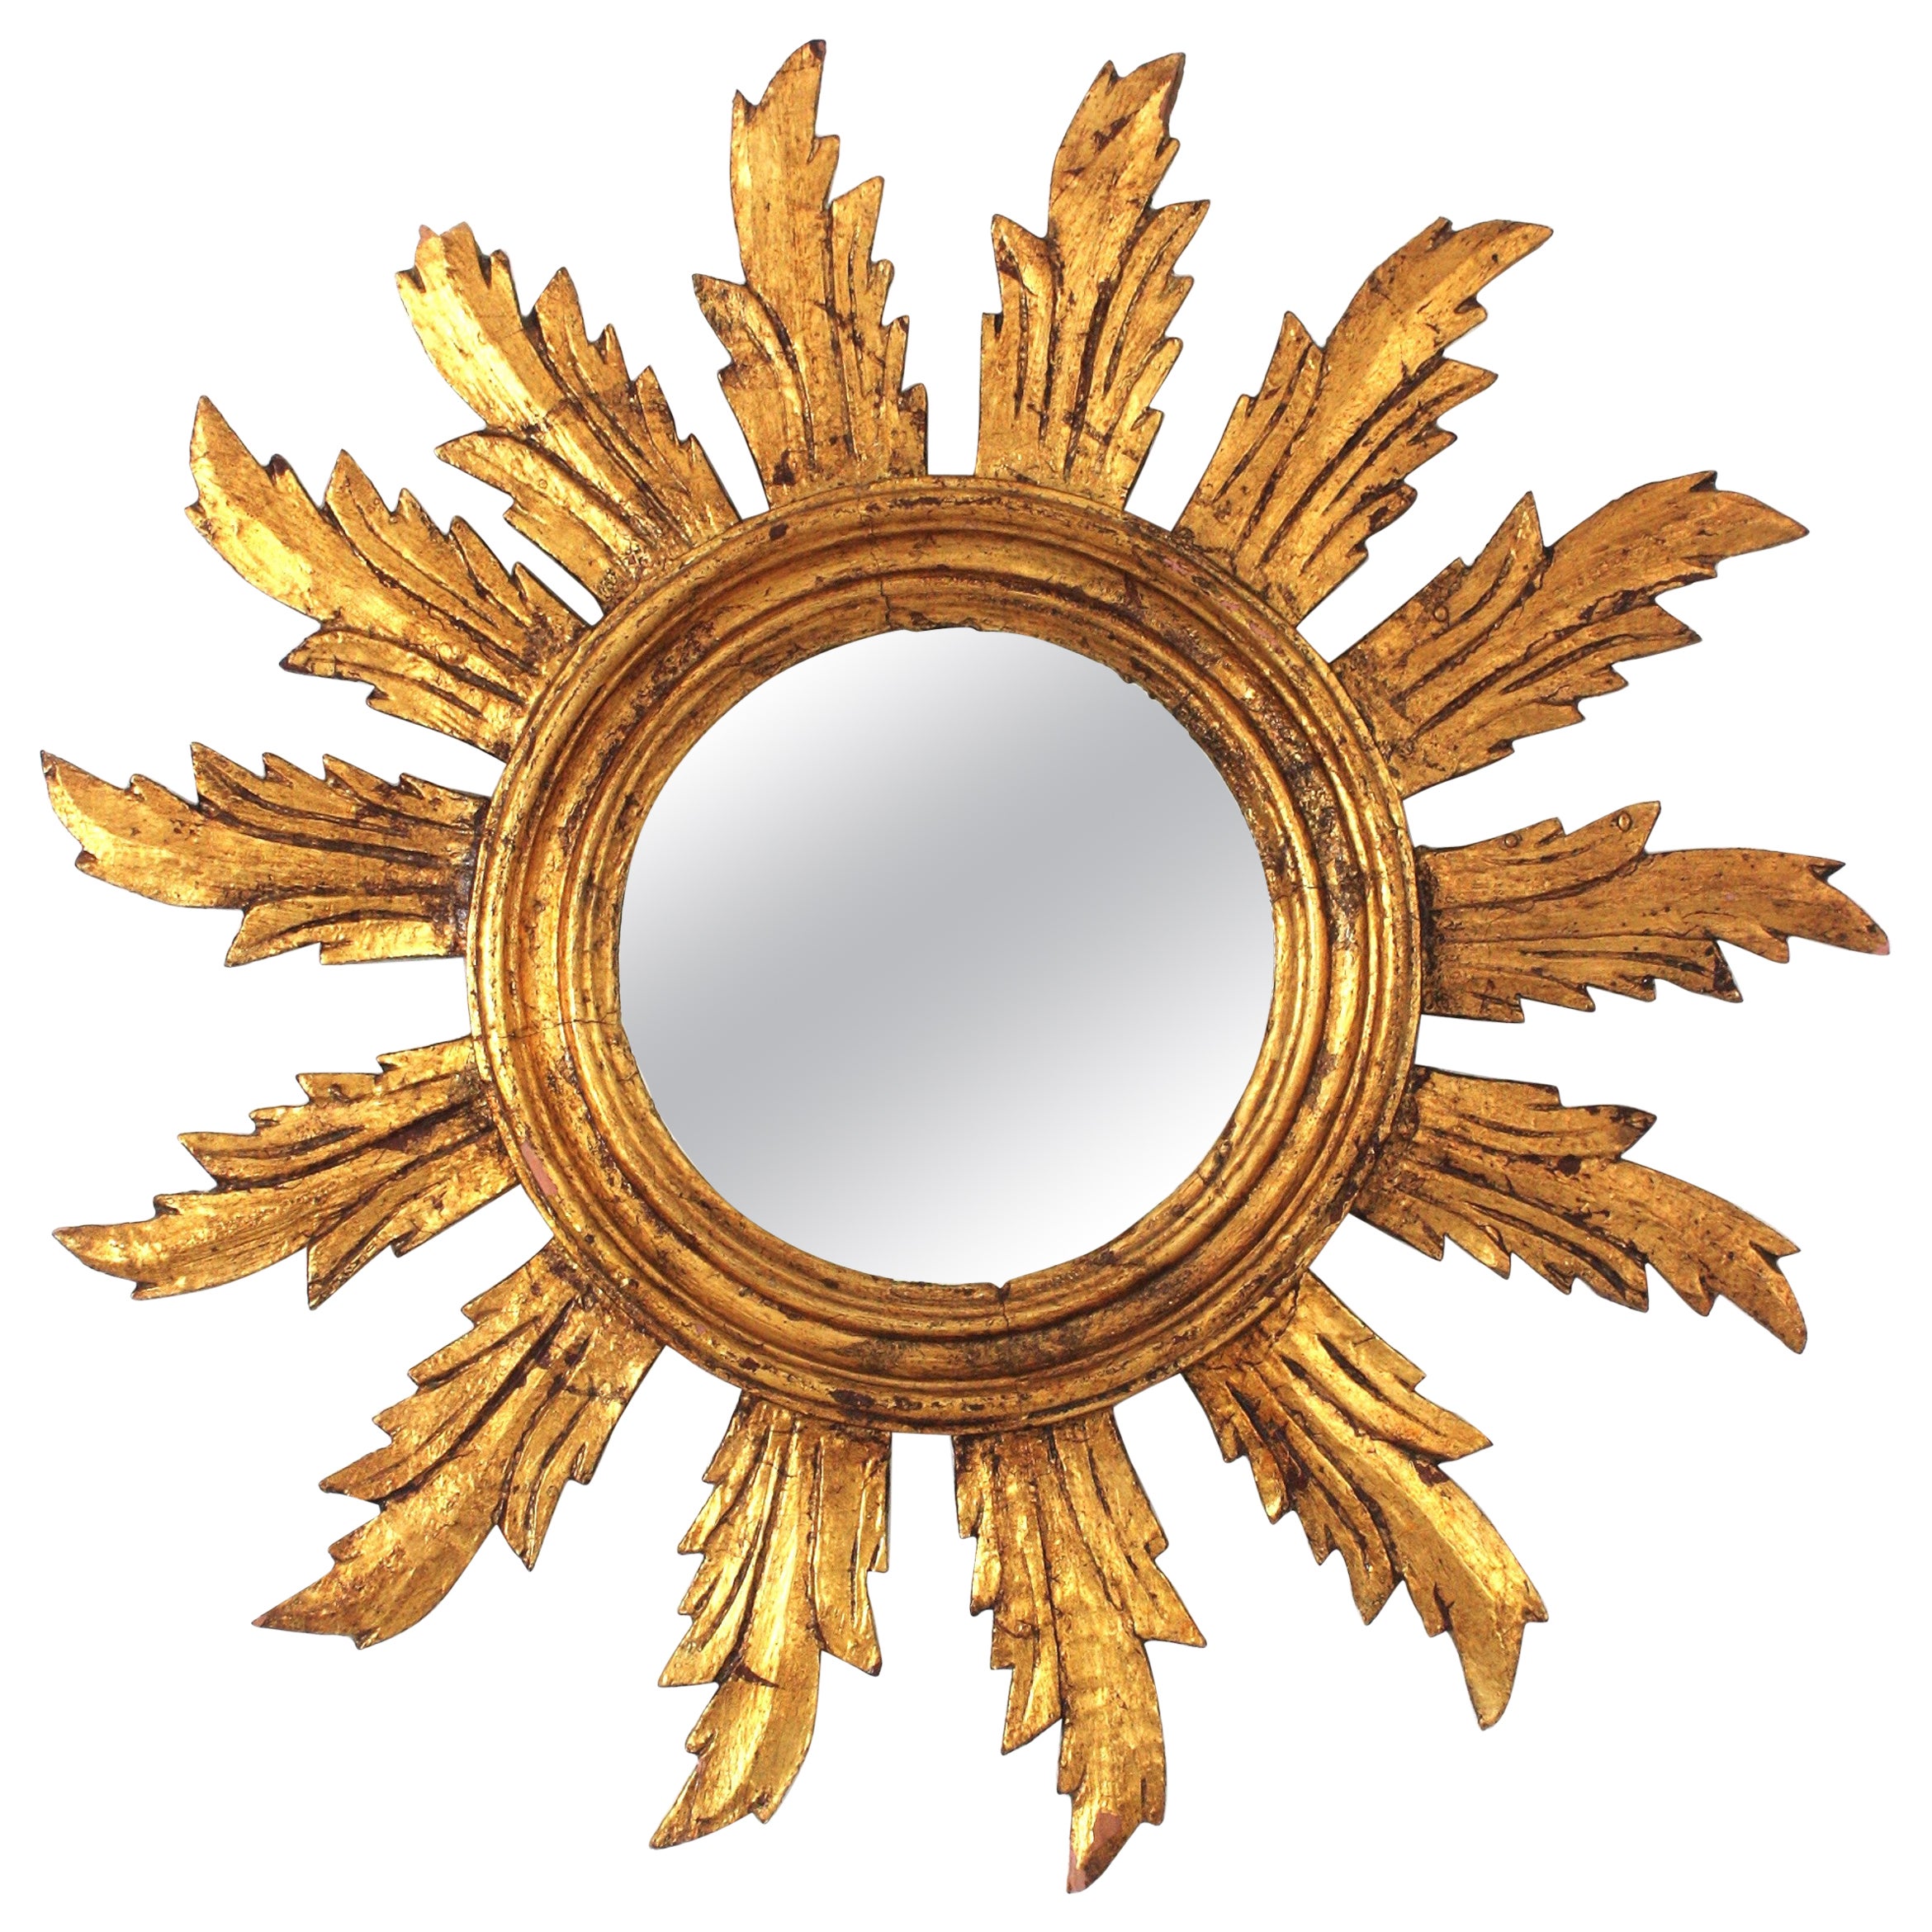 Spanish Sunburst Mirror in Carved Giltwood, 1950s For Sale